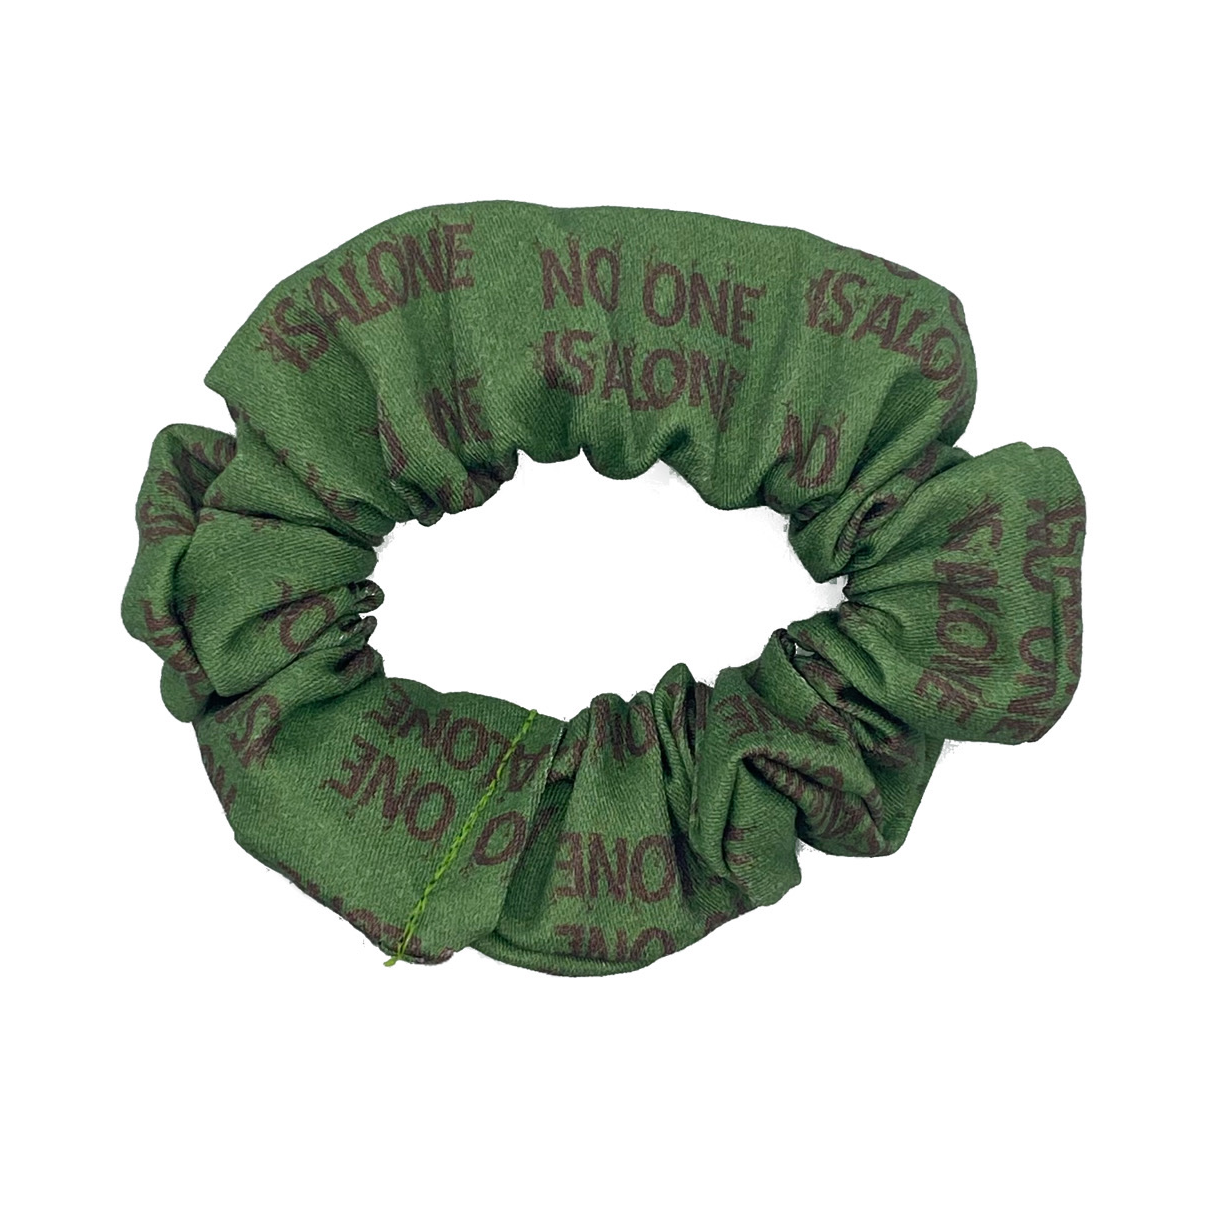 No One Is Alone Scrunchie - Inspired by Into The Woods